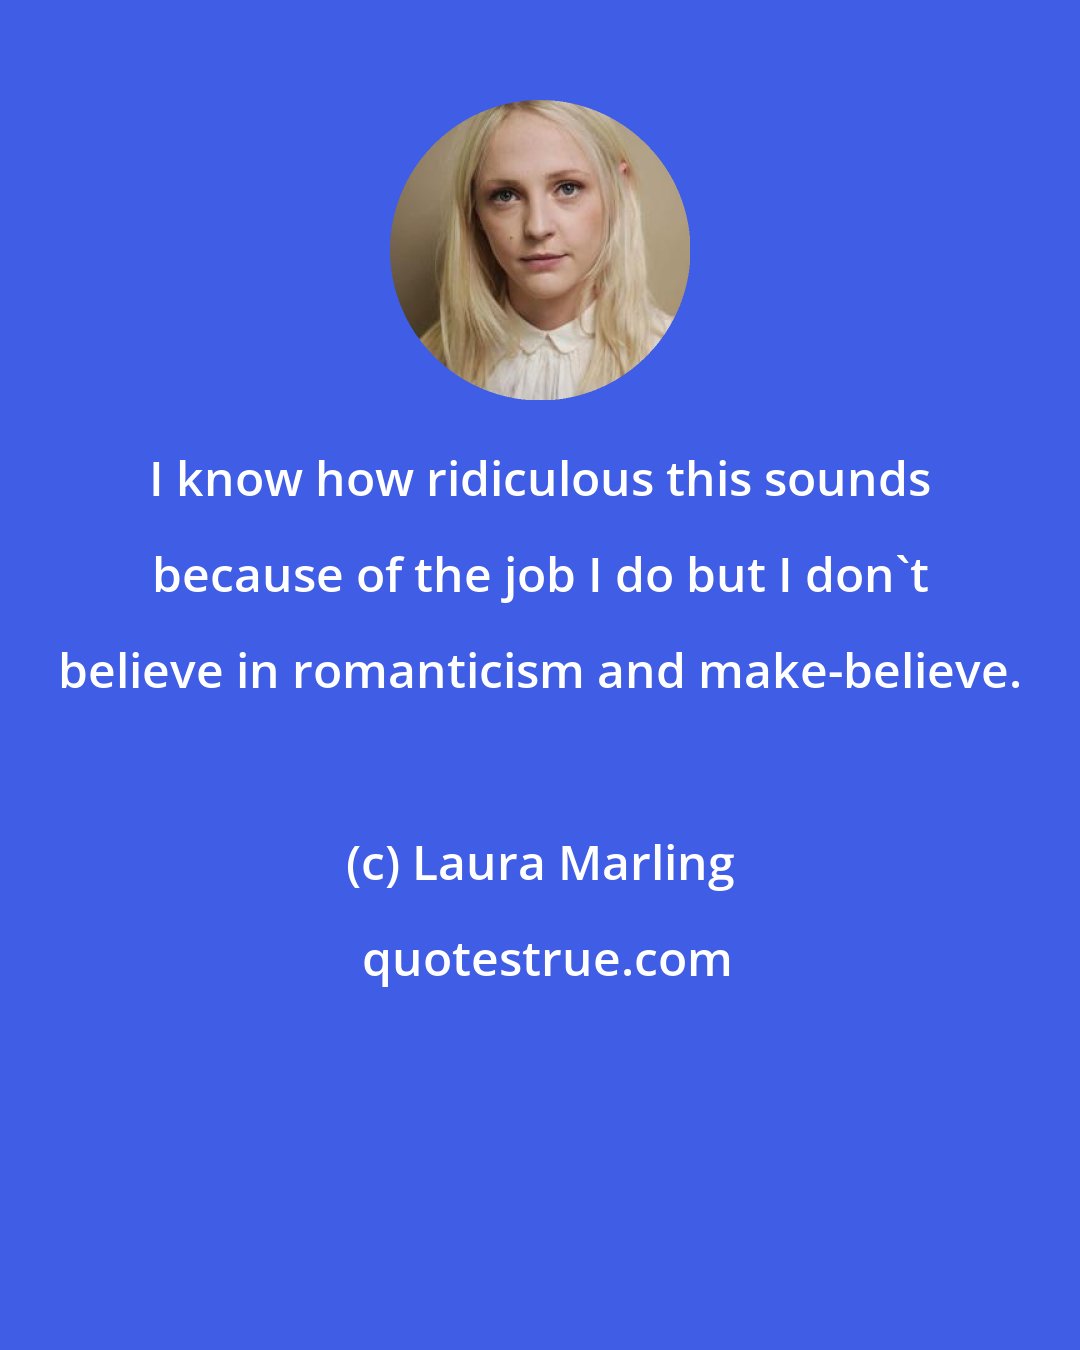 Laura Marling: I know how ridiculous this sounds because of the job I do but I don't believe in romanticism and make-believe.